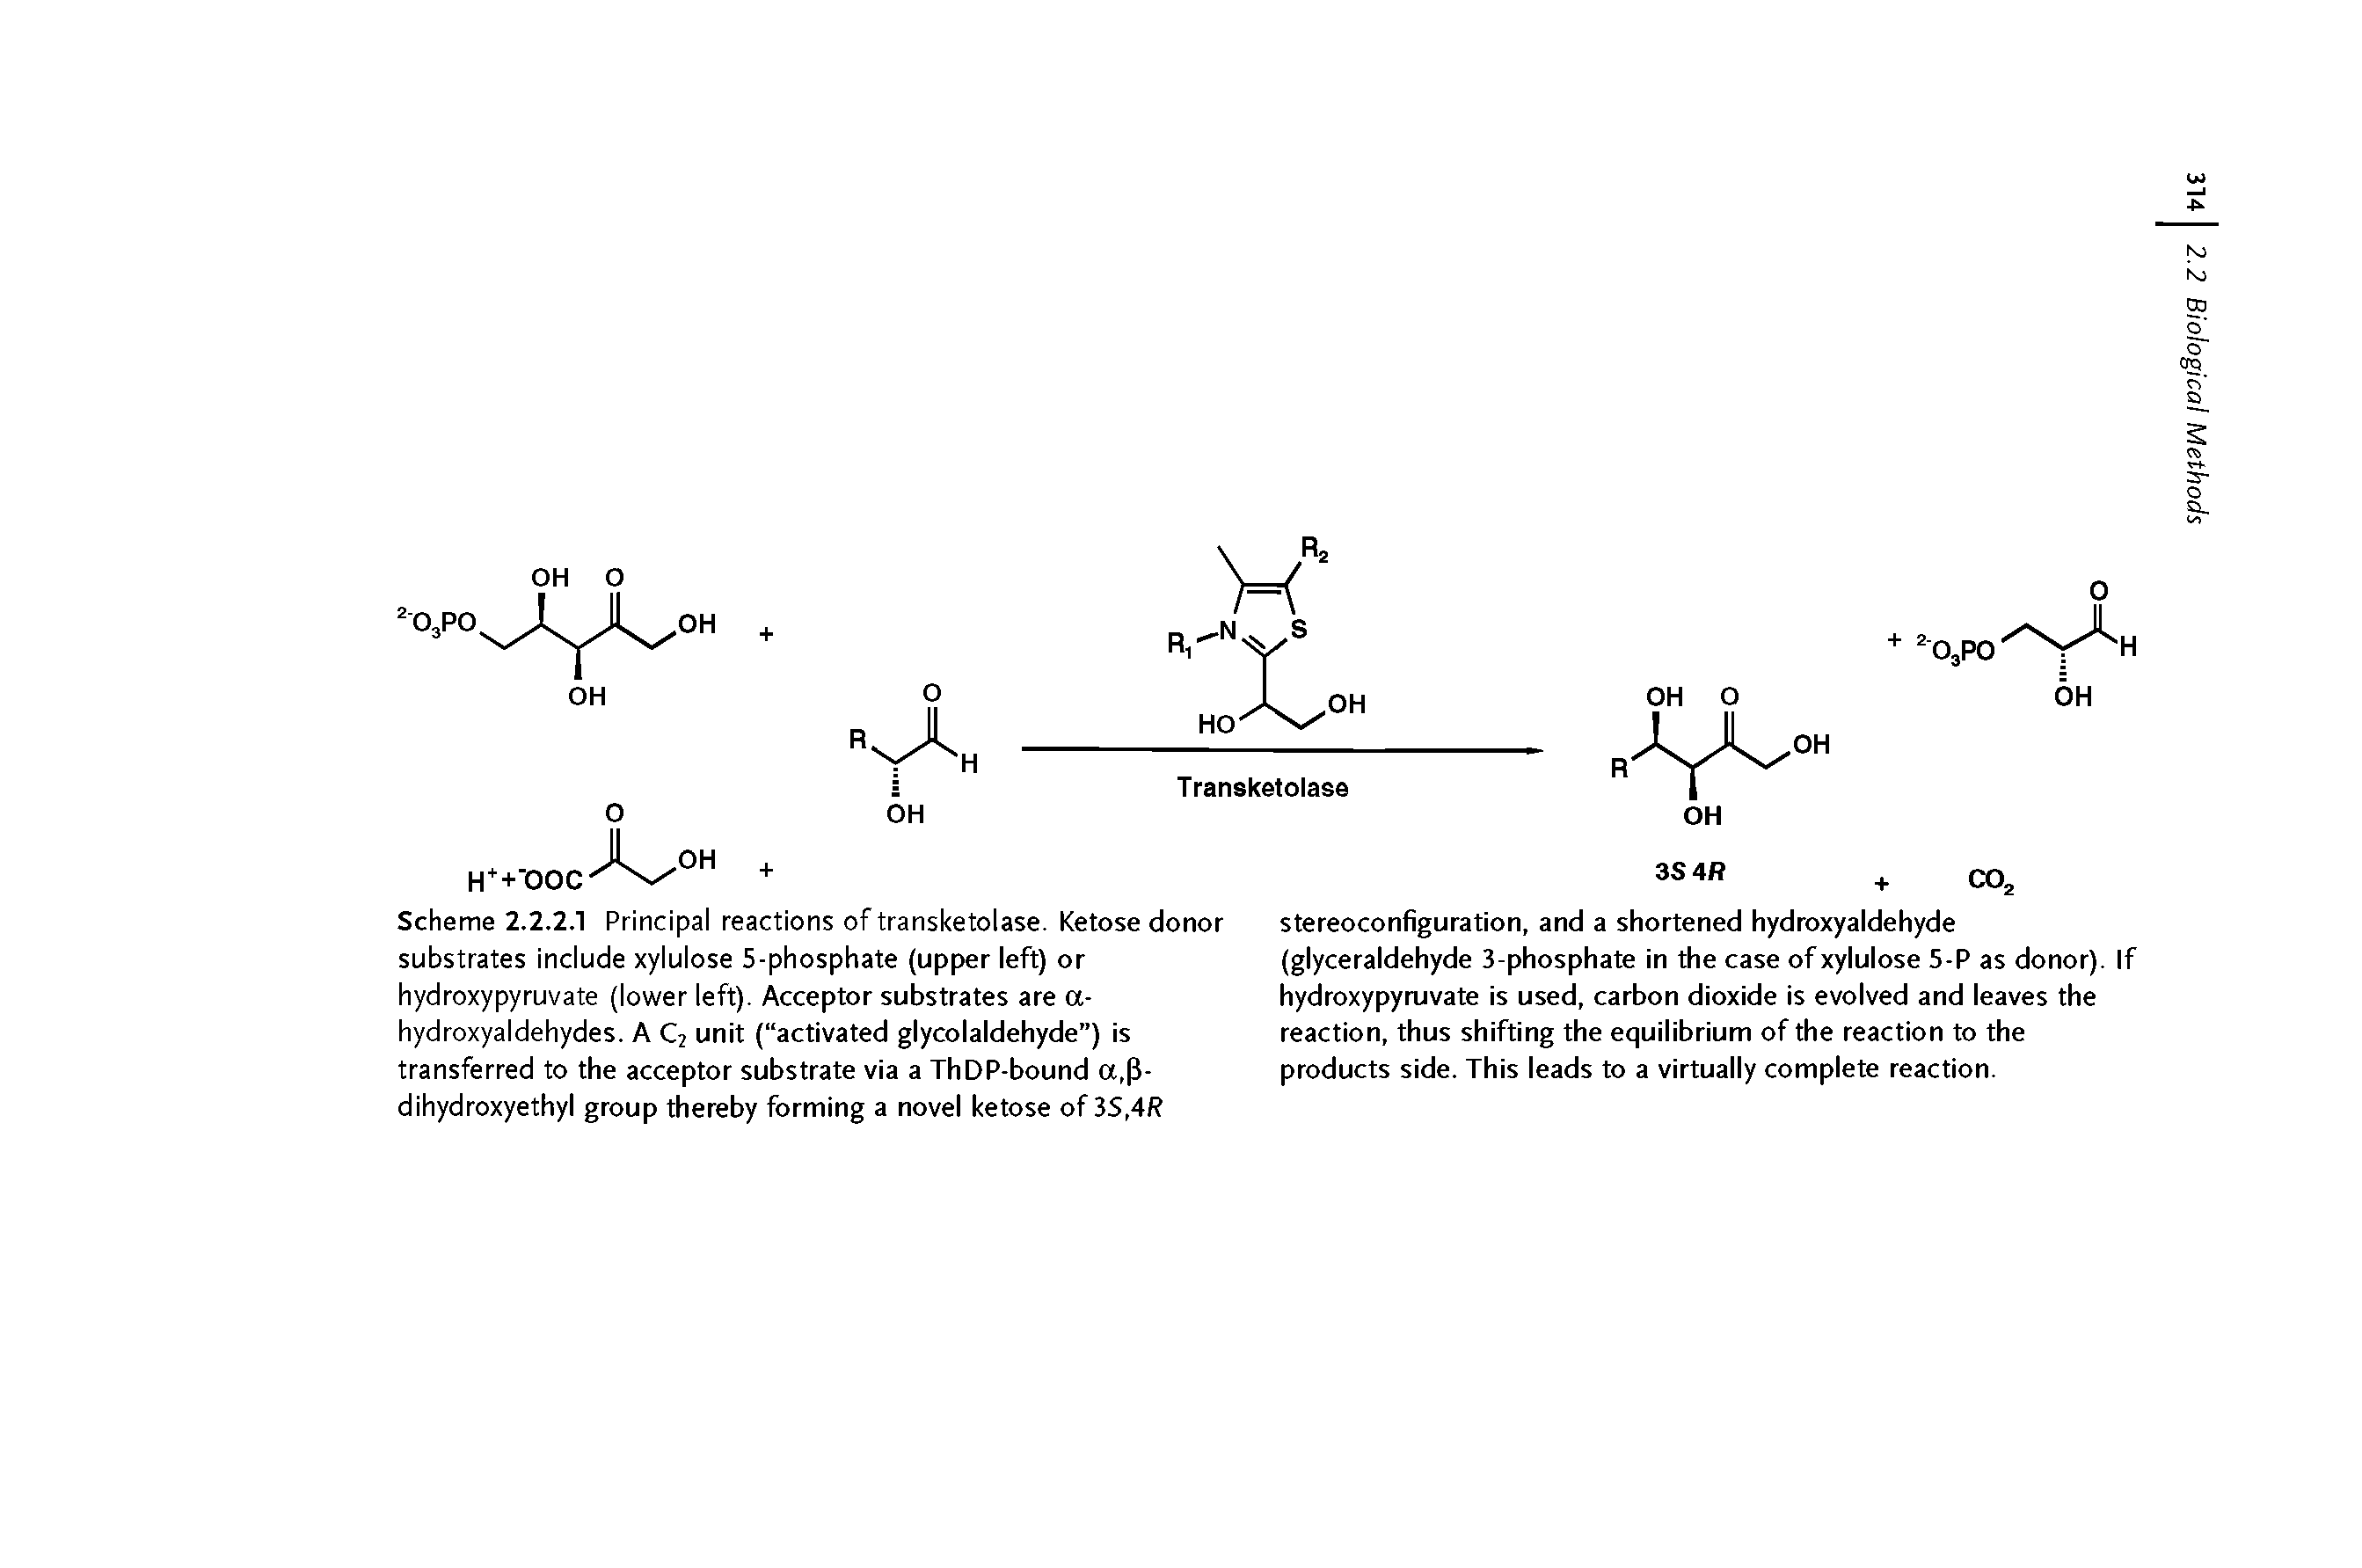 Scheme 2.2.2.1 Principal reactions of transketolase. Ketose donor substrates include xylulose 5-phosphate (upper left) or hydroxypyruvate (lower left). Acceptor substrates are a-hydroxyaldehydes. A C2 unit ( activated glycolaldehyde ) is transferred to the acceptor substrate via a ThDP-bound a, 3-dihydroxyethyl group thereby forming a novel ketose of 3S,4R...